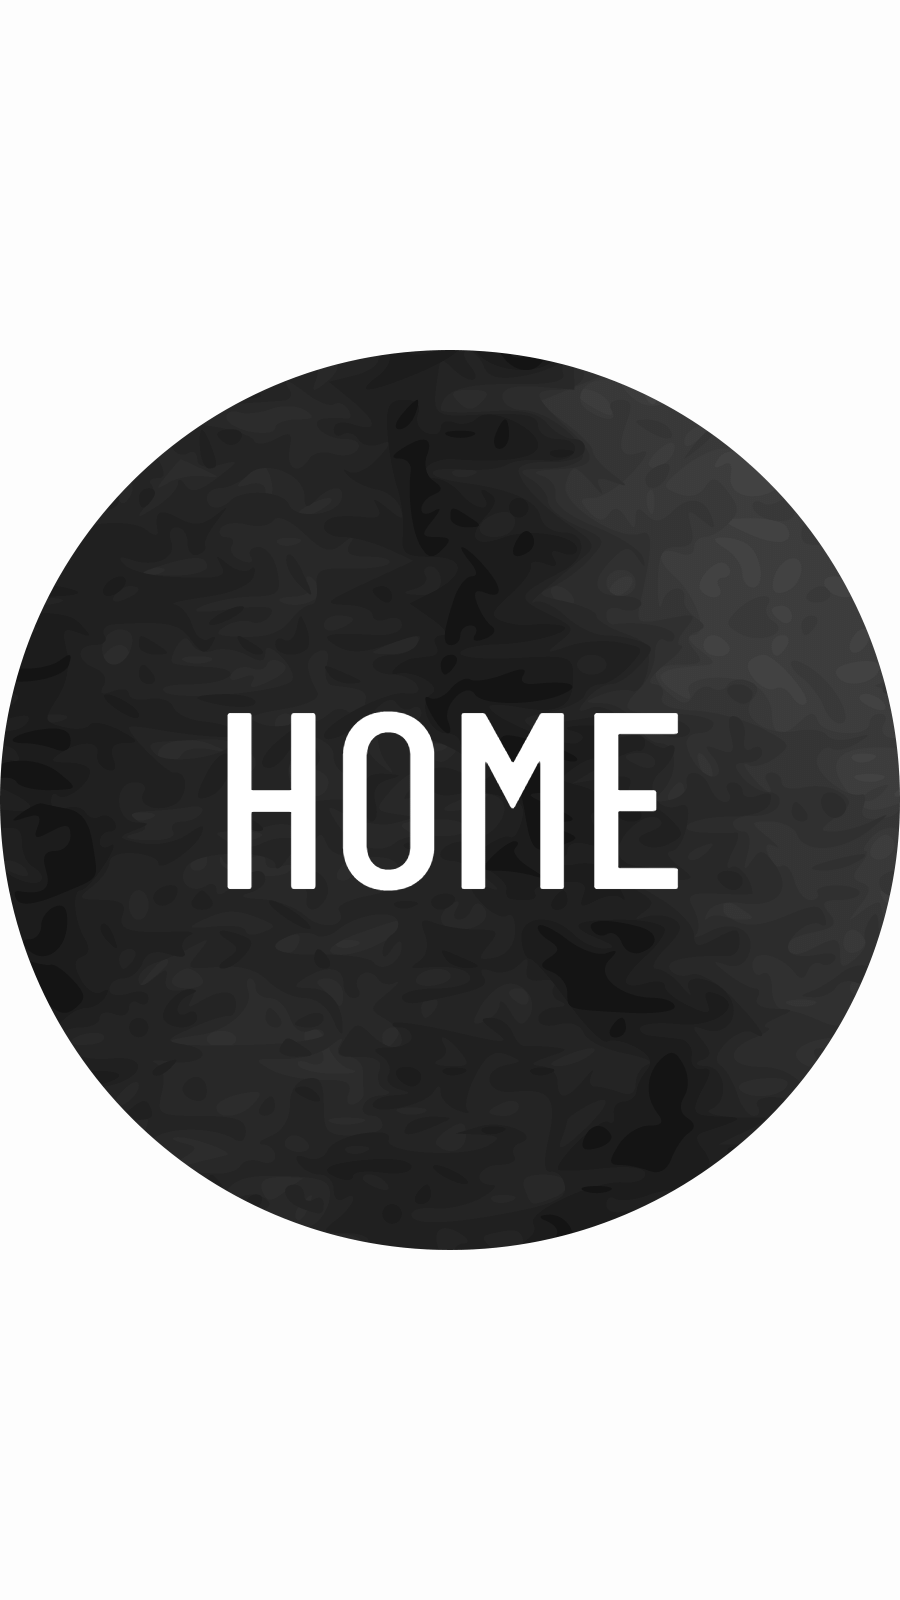 Minimalist Style White Background Black Circle Home Text Instagram Highlight